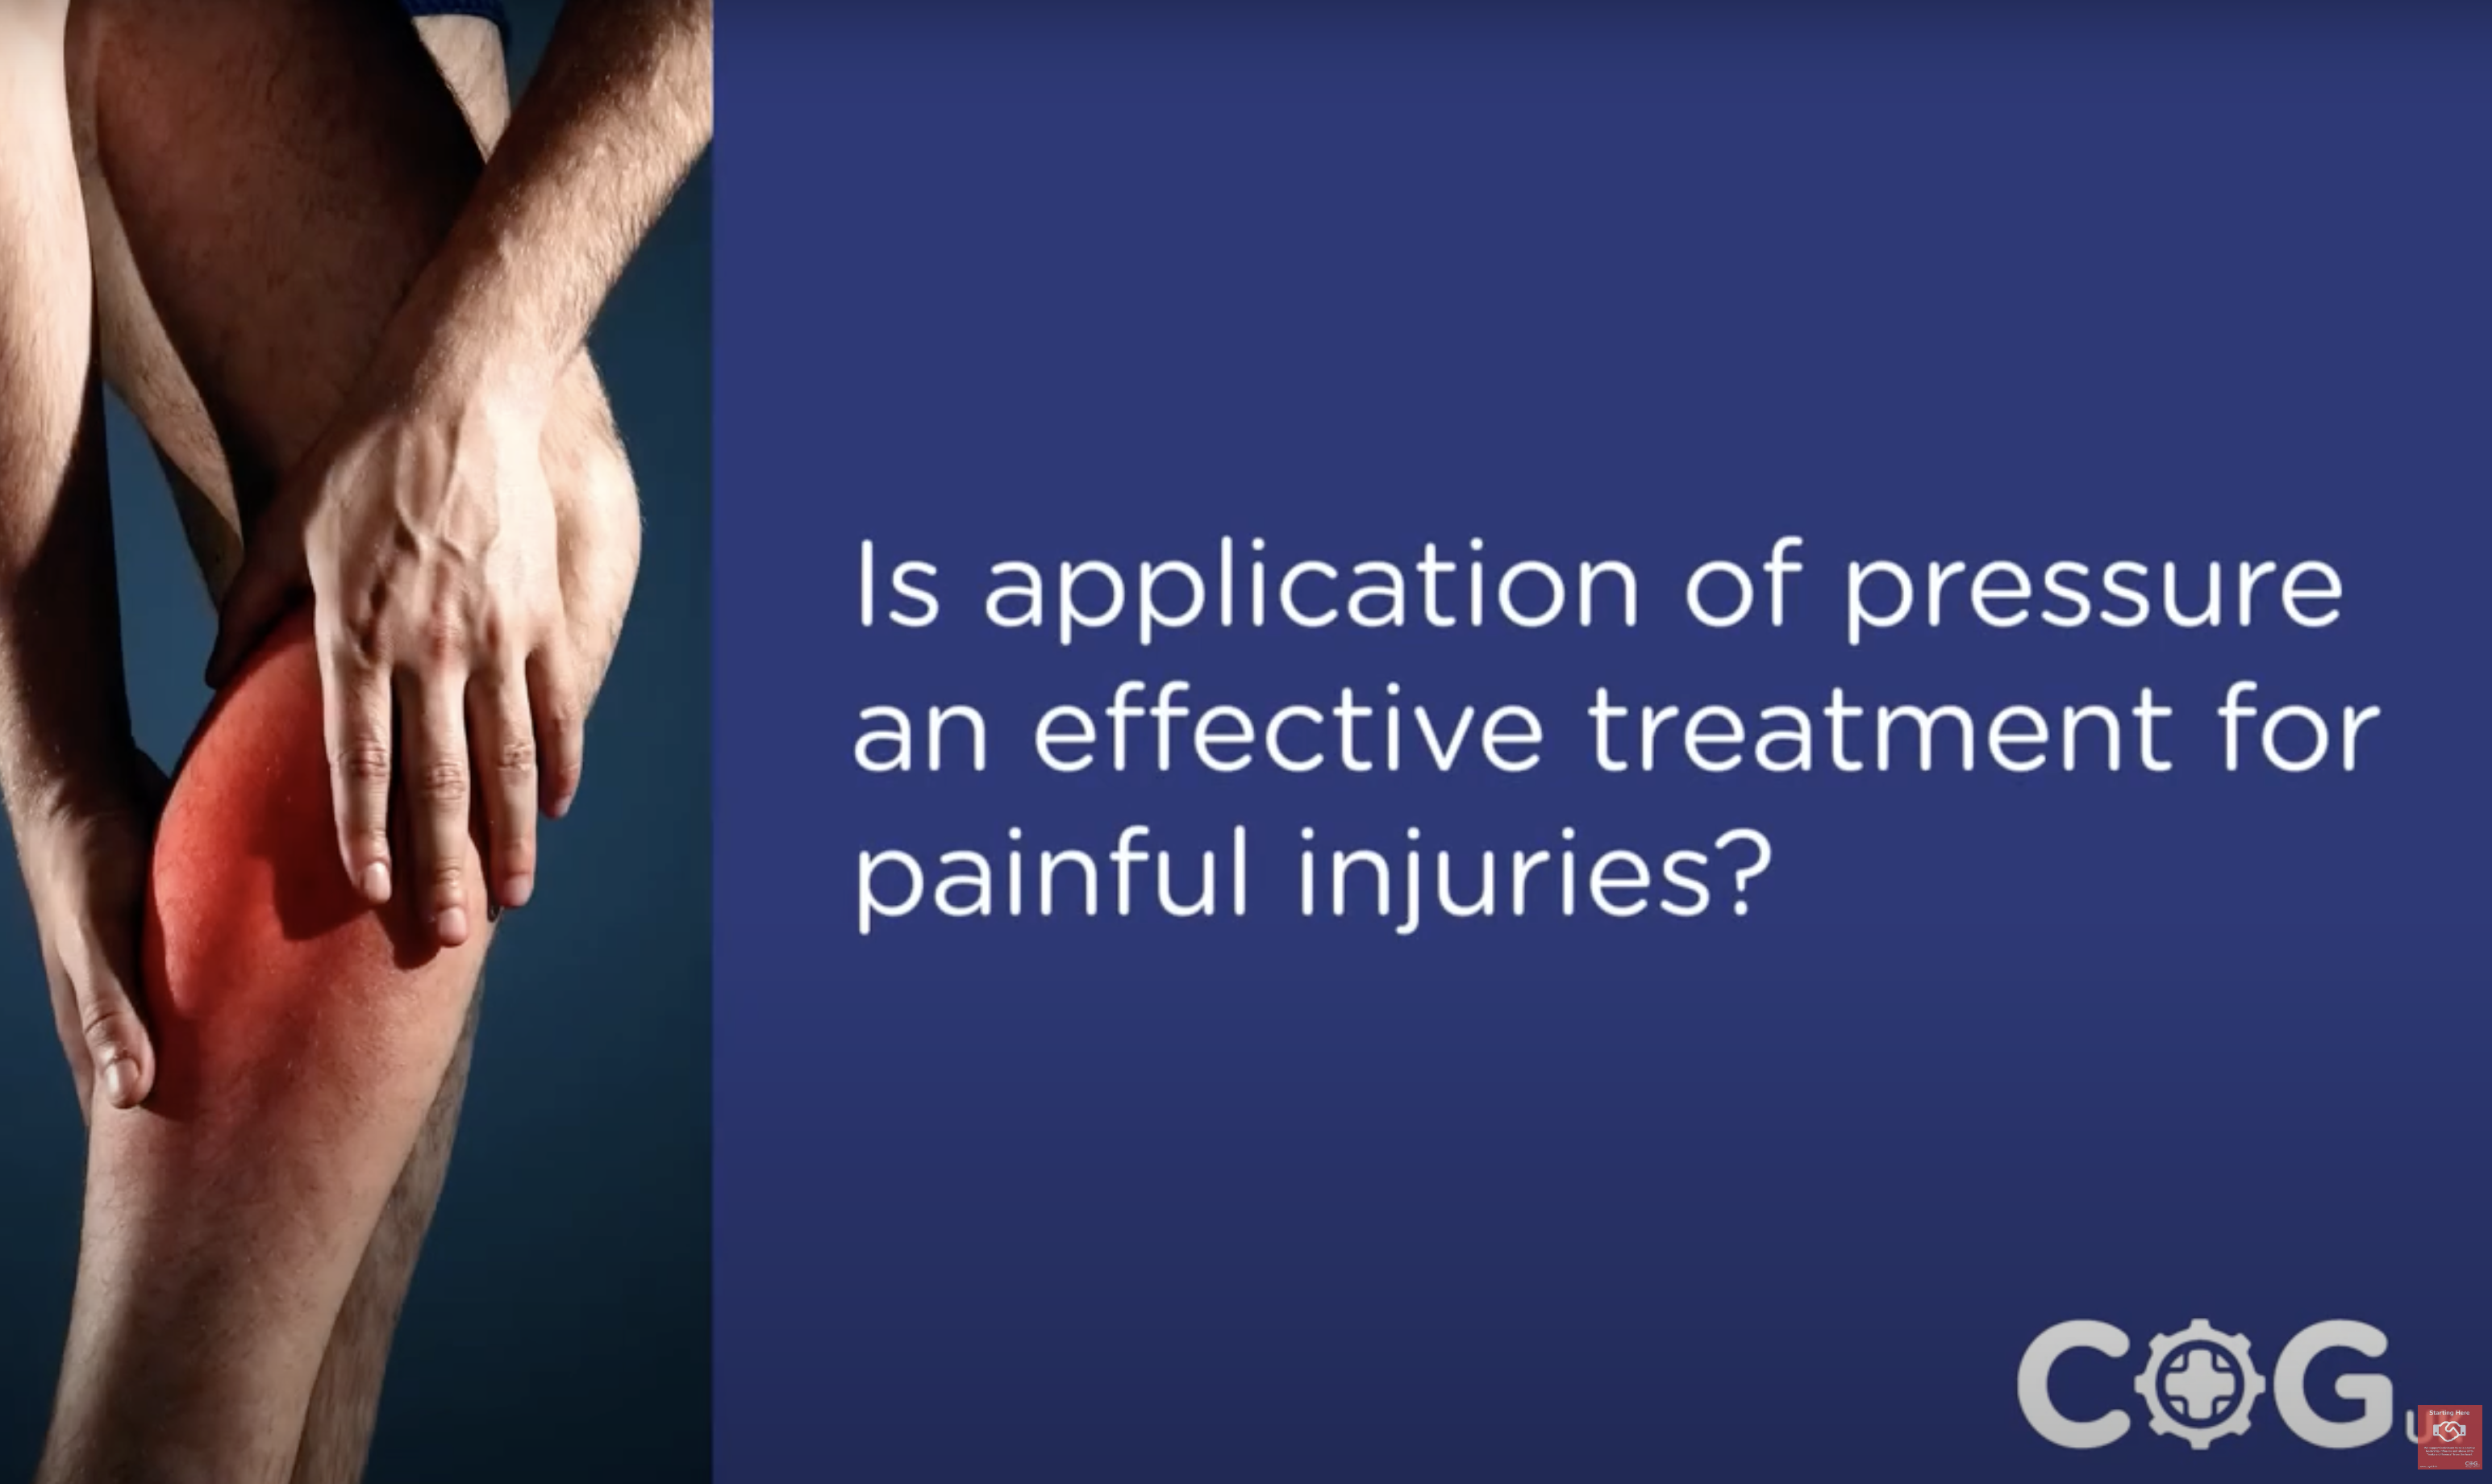 Sports Injury Prevention Q&A: Is Application Of Pressure Effective For Painful Injuries?